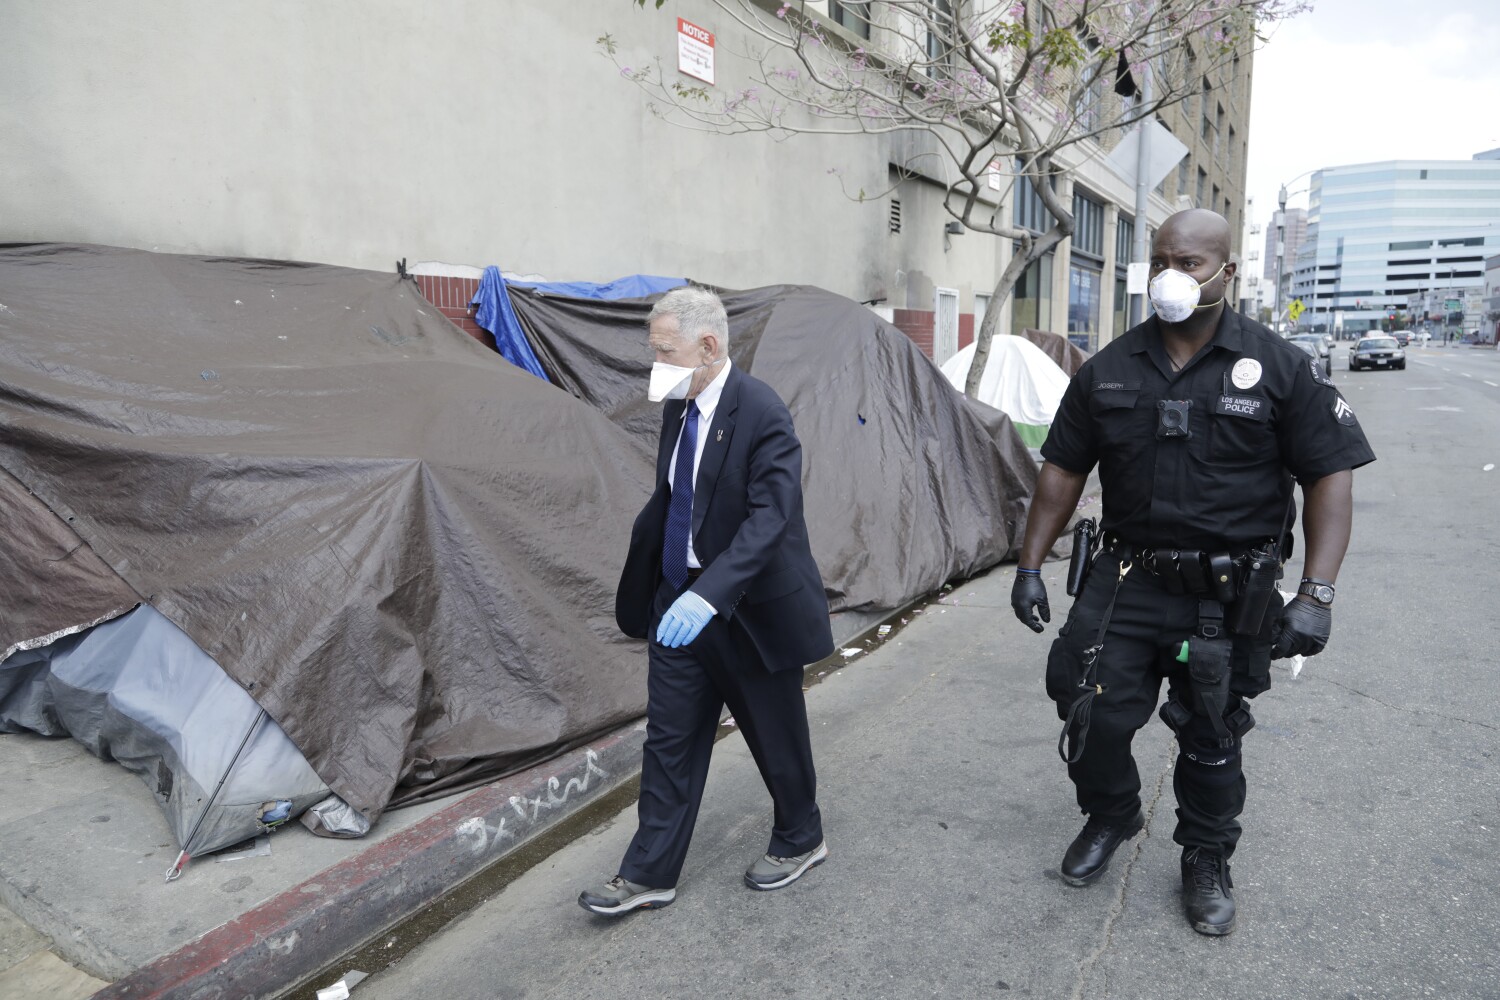 After a cold and wet week, federal court comes to skid row